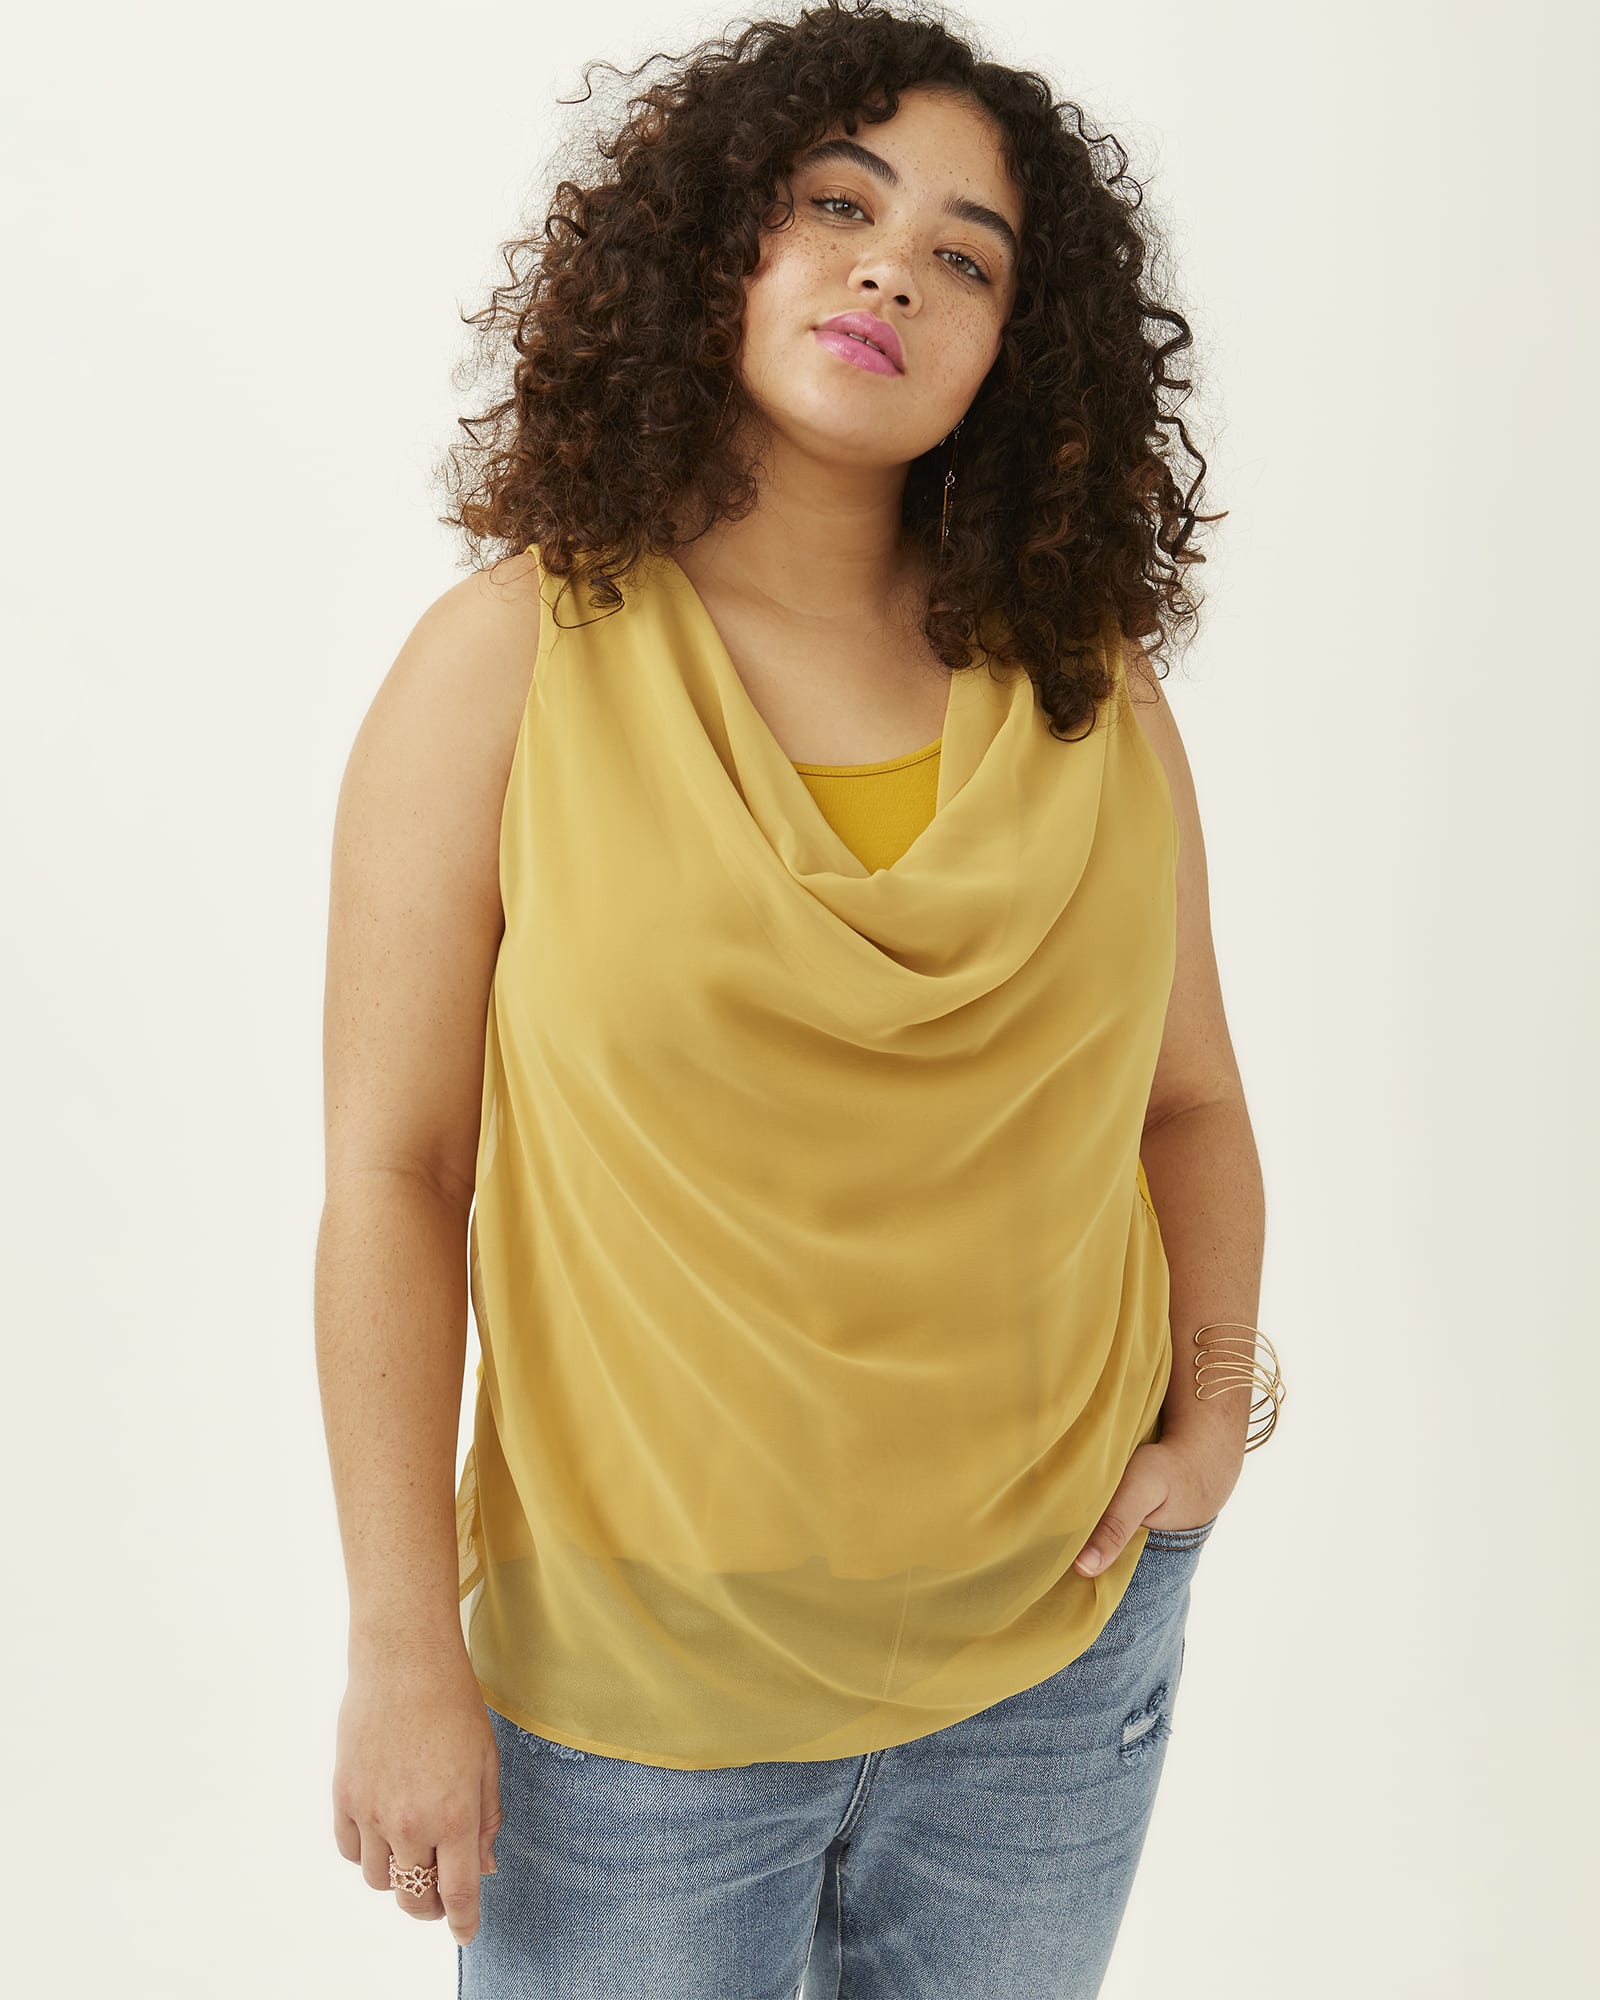 Plus Size Gold Tops